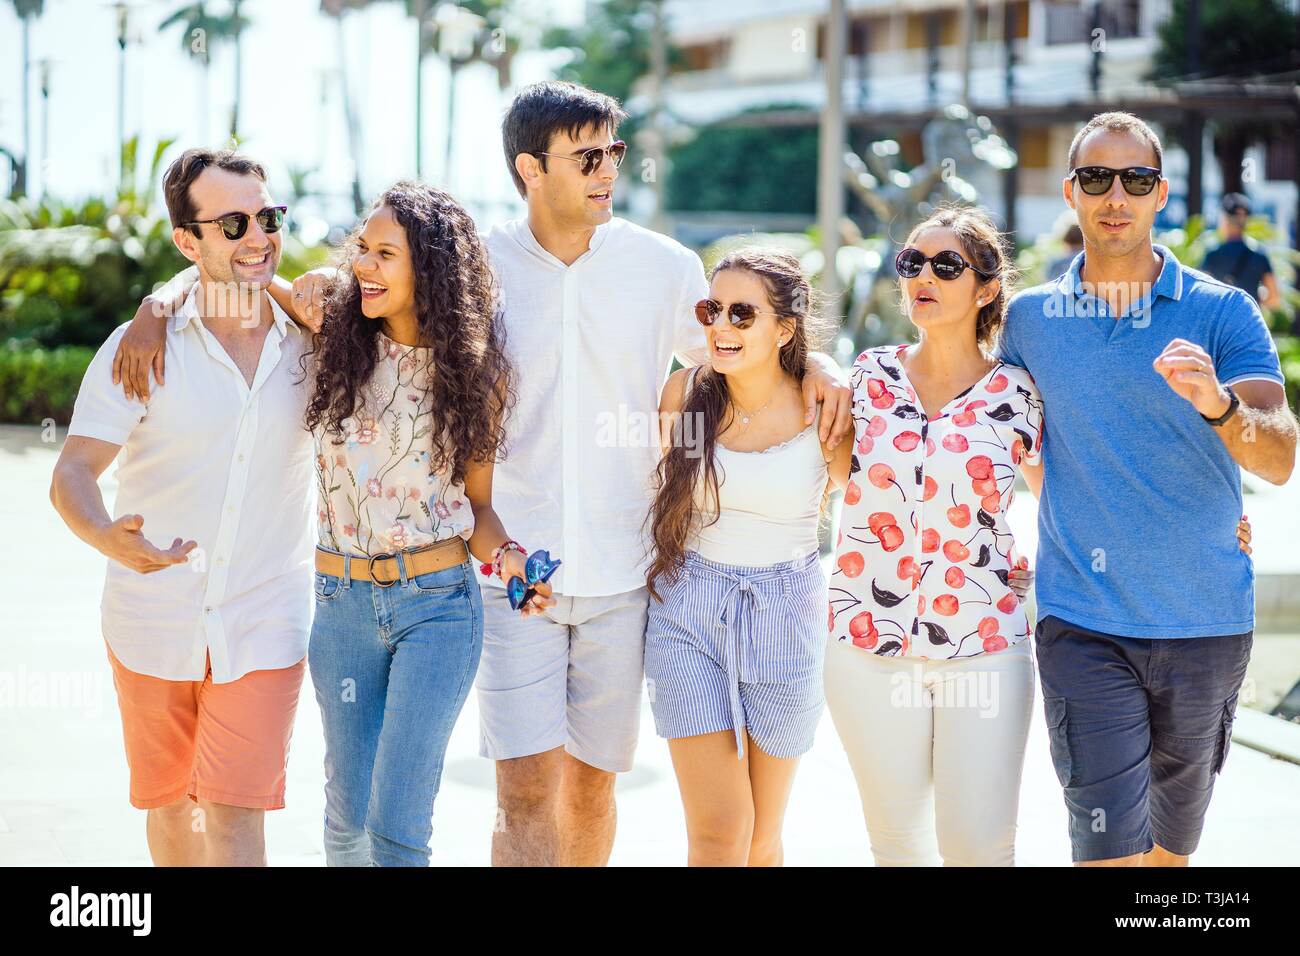 Six friends walking, taking, laughing and having fun during day time in urban setting, Portugal Stock Photo